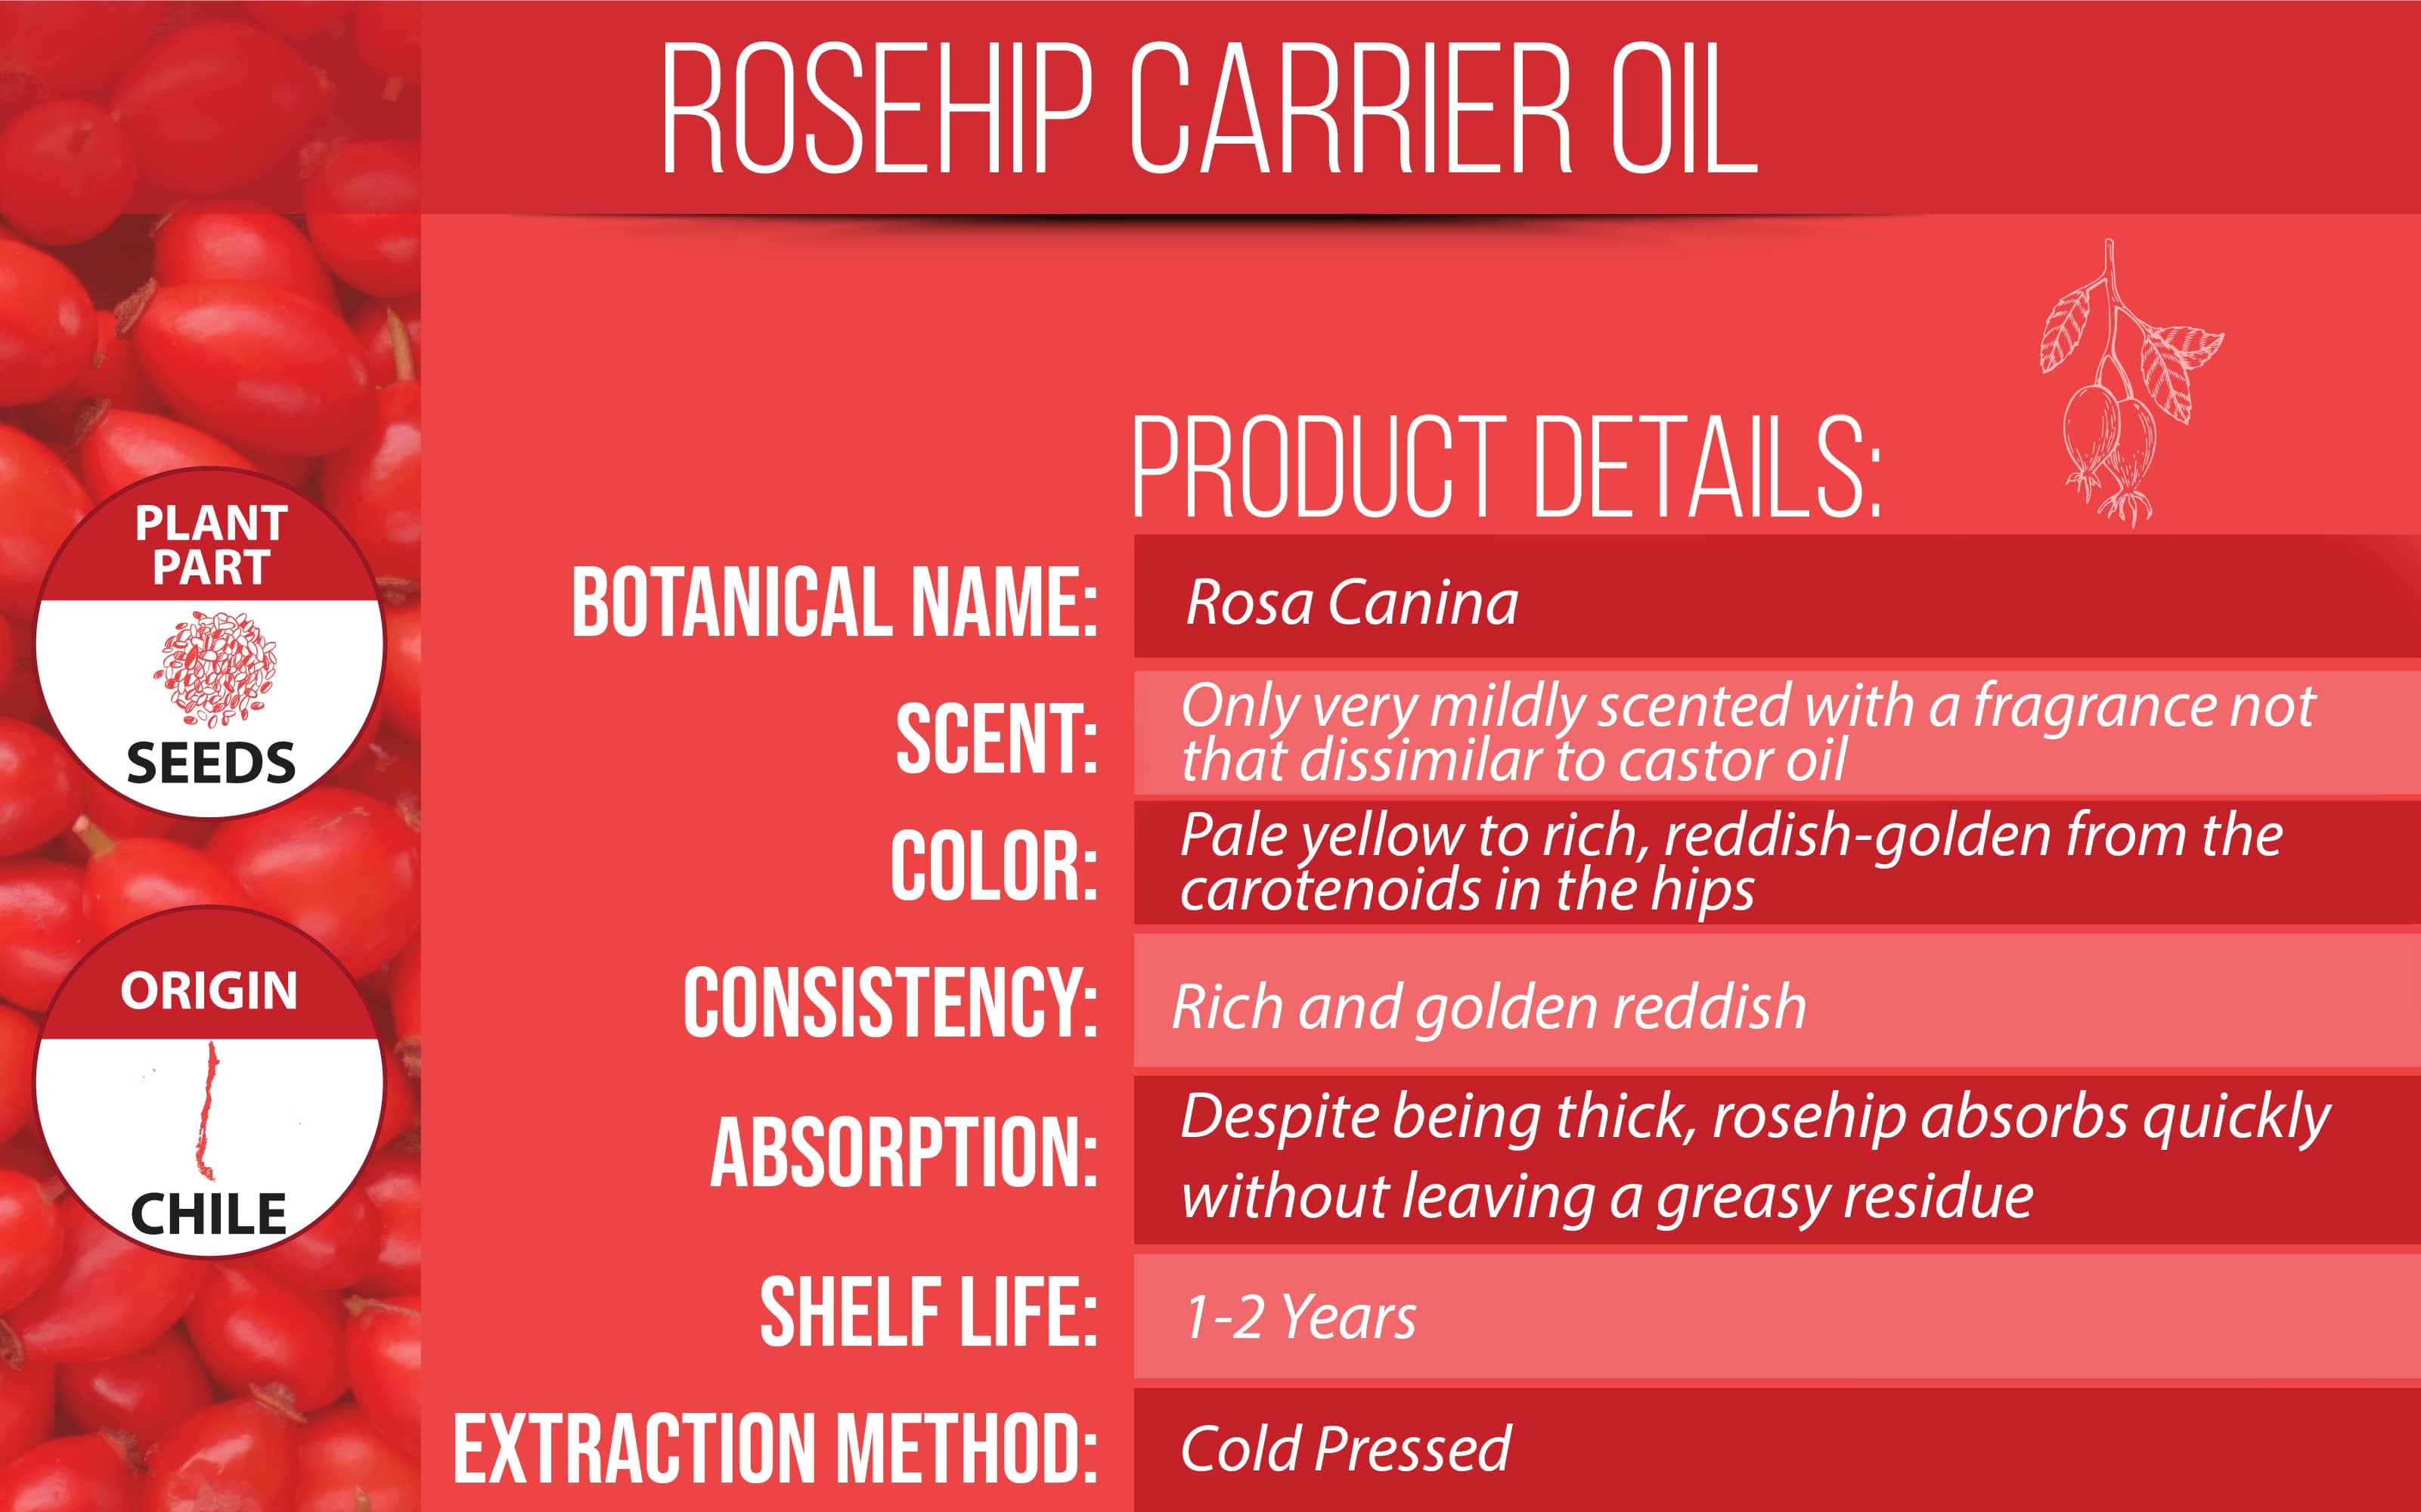 Rosehip Oil Product Details